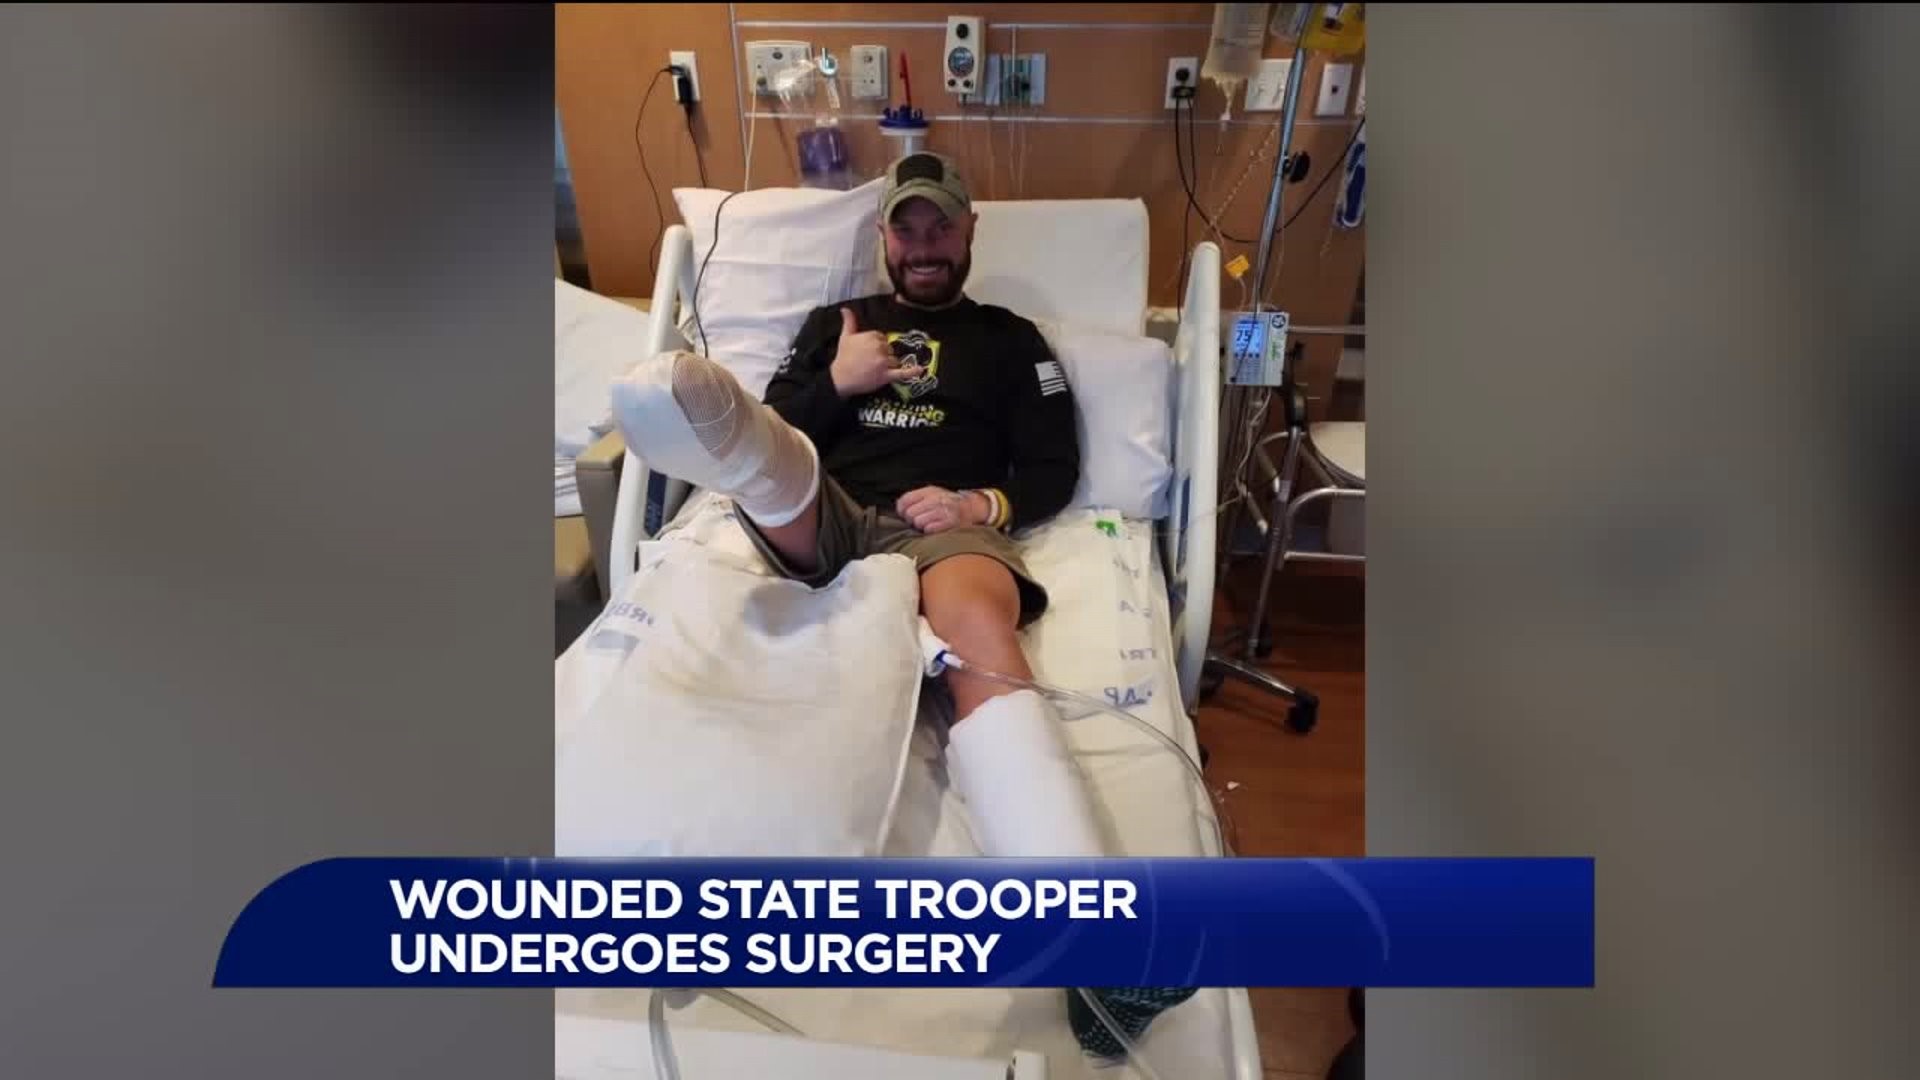 Wounded State Trooper Undergoes Surgery